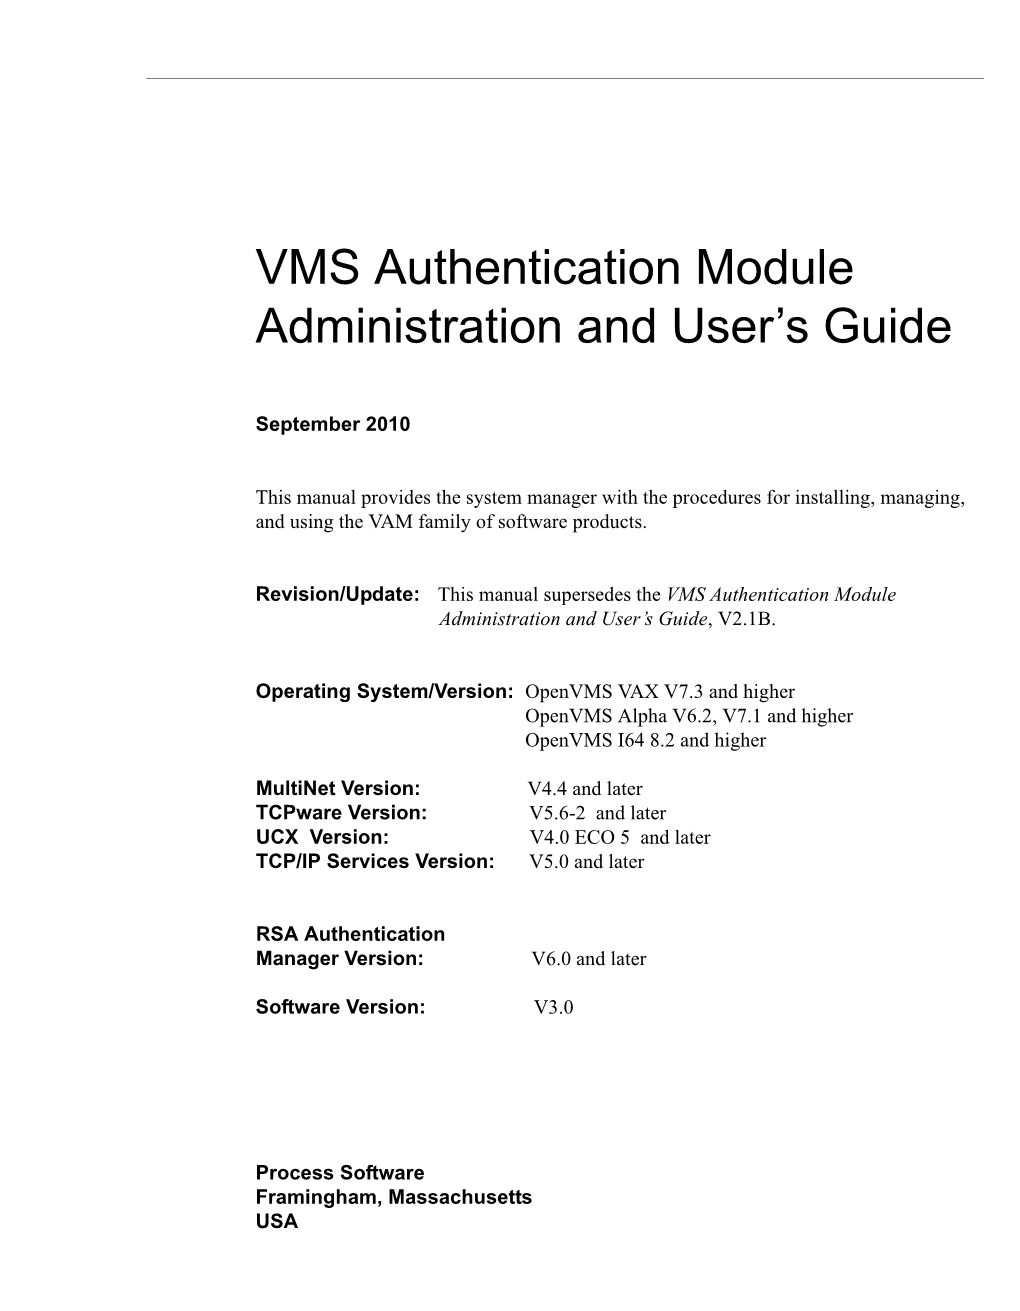 VMS Authentication Module Administration and User's Guide